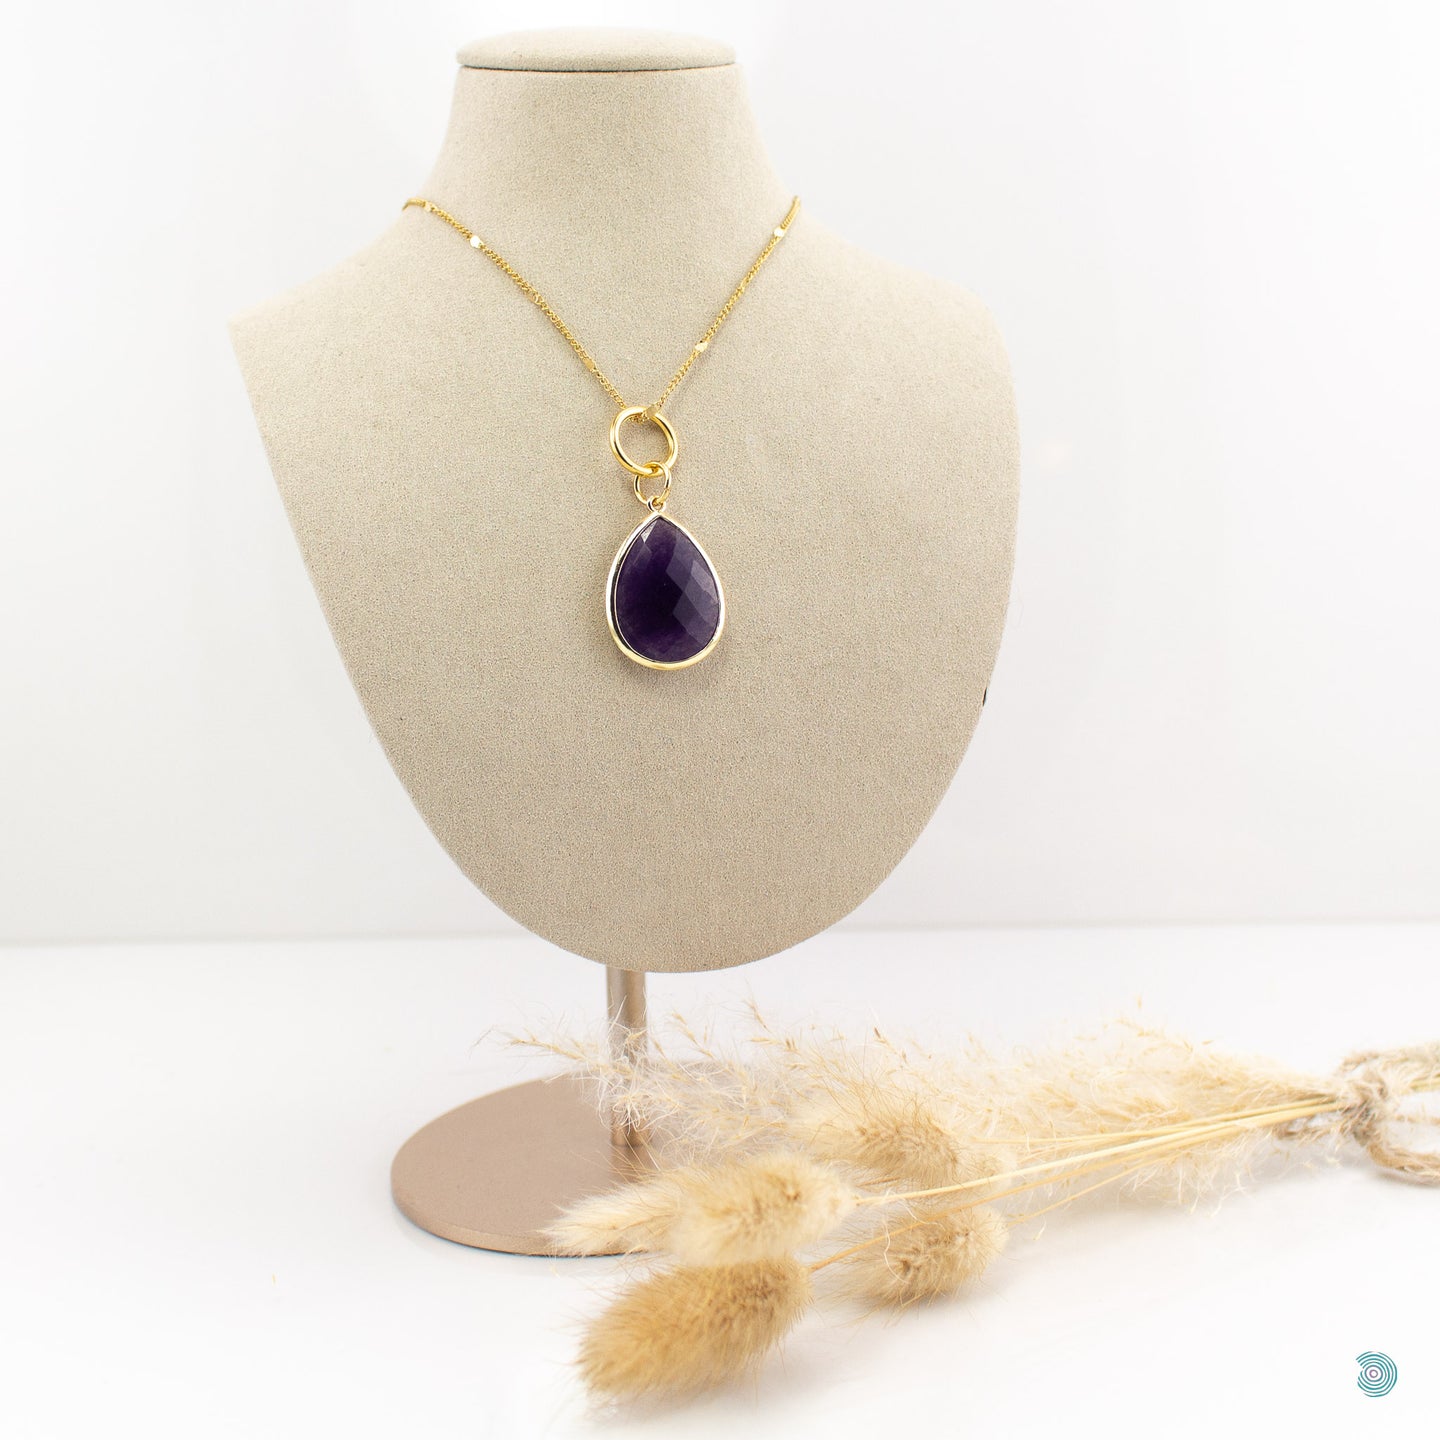 Large Amethyst teardrop pendant, sitting on a small chunky gold plated hoop, suspended on a gold plated stainless steel chain.  This necklace is 20 inches in length with a 2inch extension chain.  It comes presented in a pretty gift box for safe keeping or making it perfect for gift giving.  Designed and made in Dingle